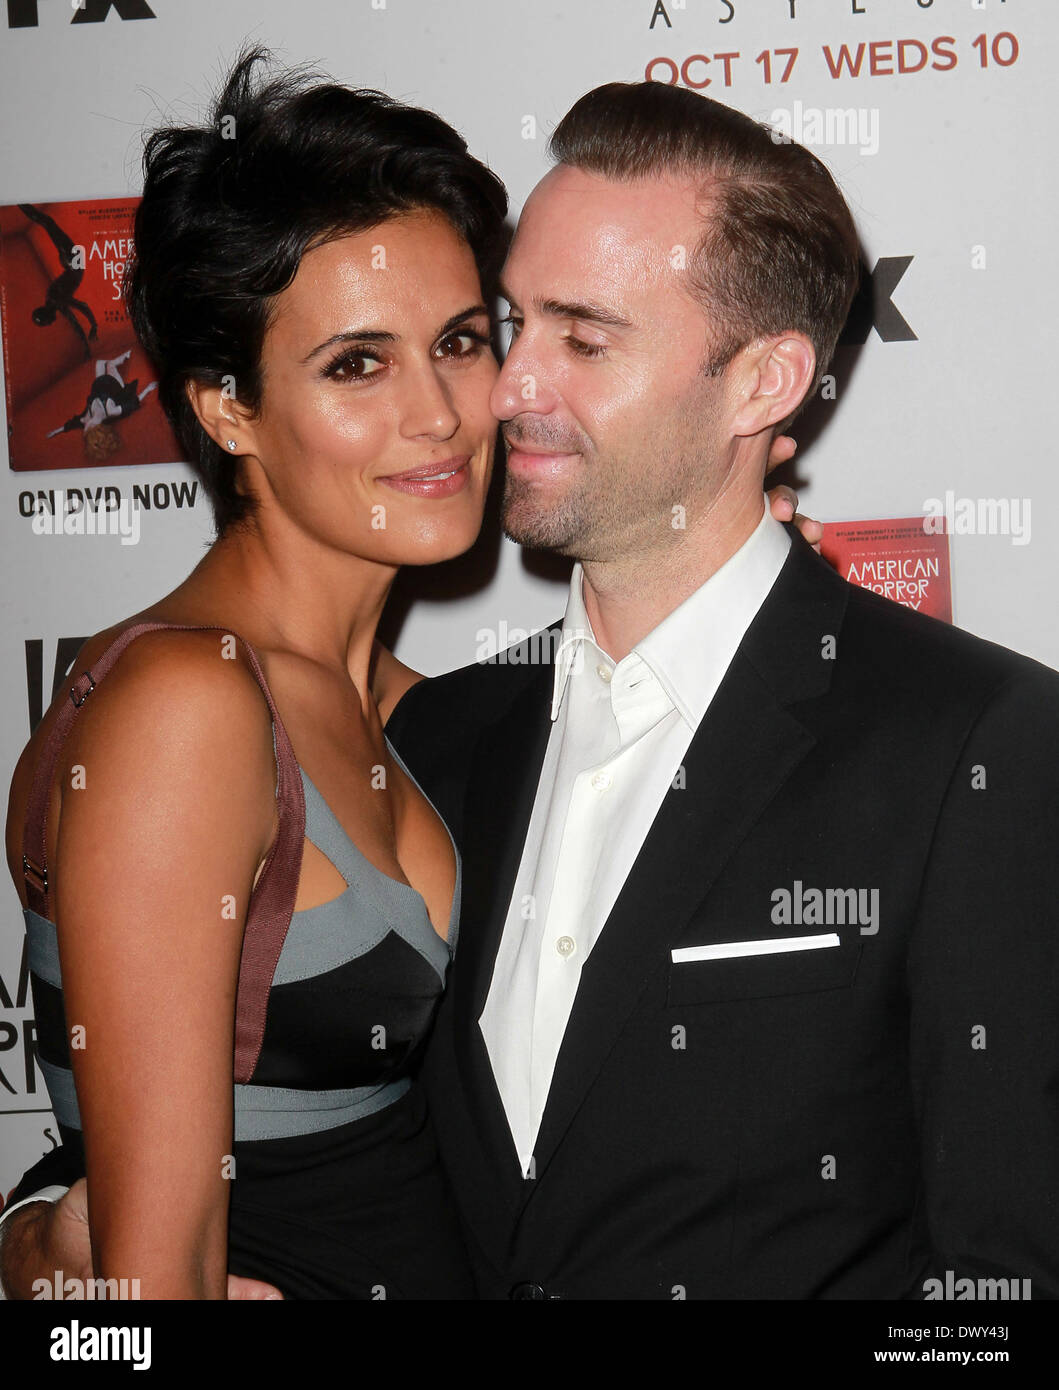 Maria Dolores Dieguez and Joseph Fiennes Premiere Screening of FX's 'American Horror Story: Asylum' at the Paramount Theatre Hollywood, California - 13.10.12 Featuring: Maria Dolores Dieguez and Joseph Fiennes Where: Hollywood, California, United States W Stock Photo